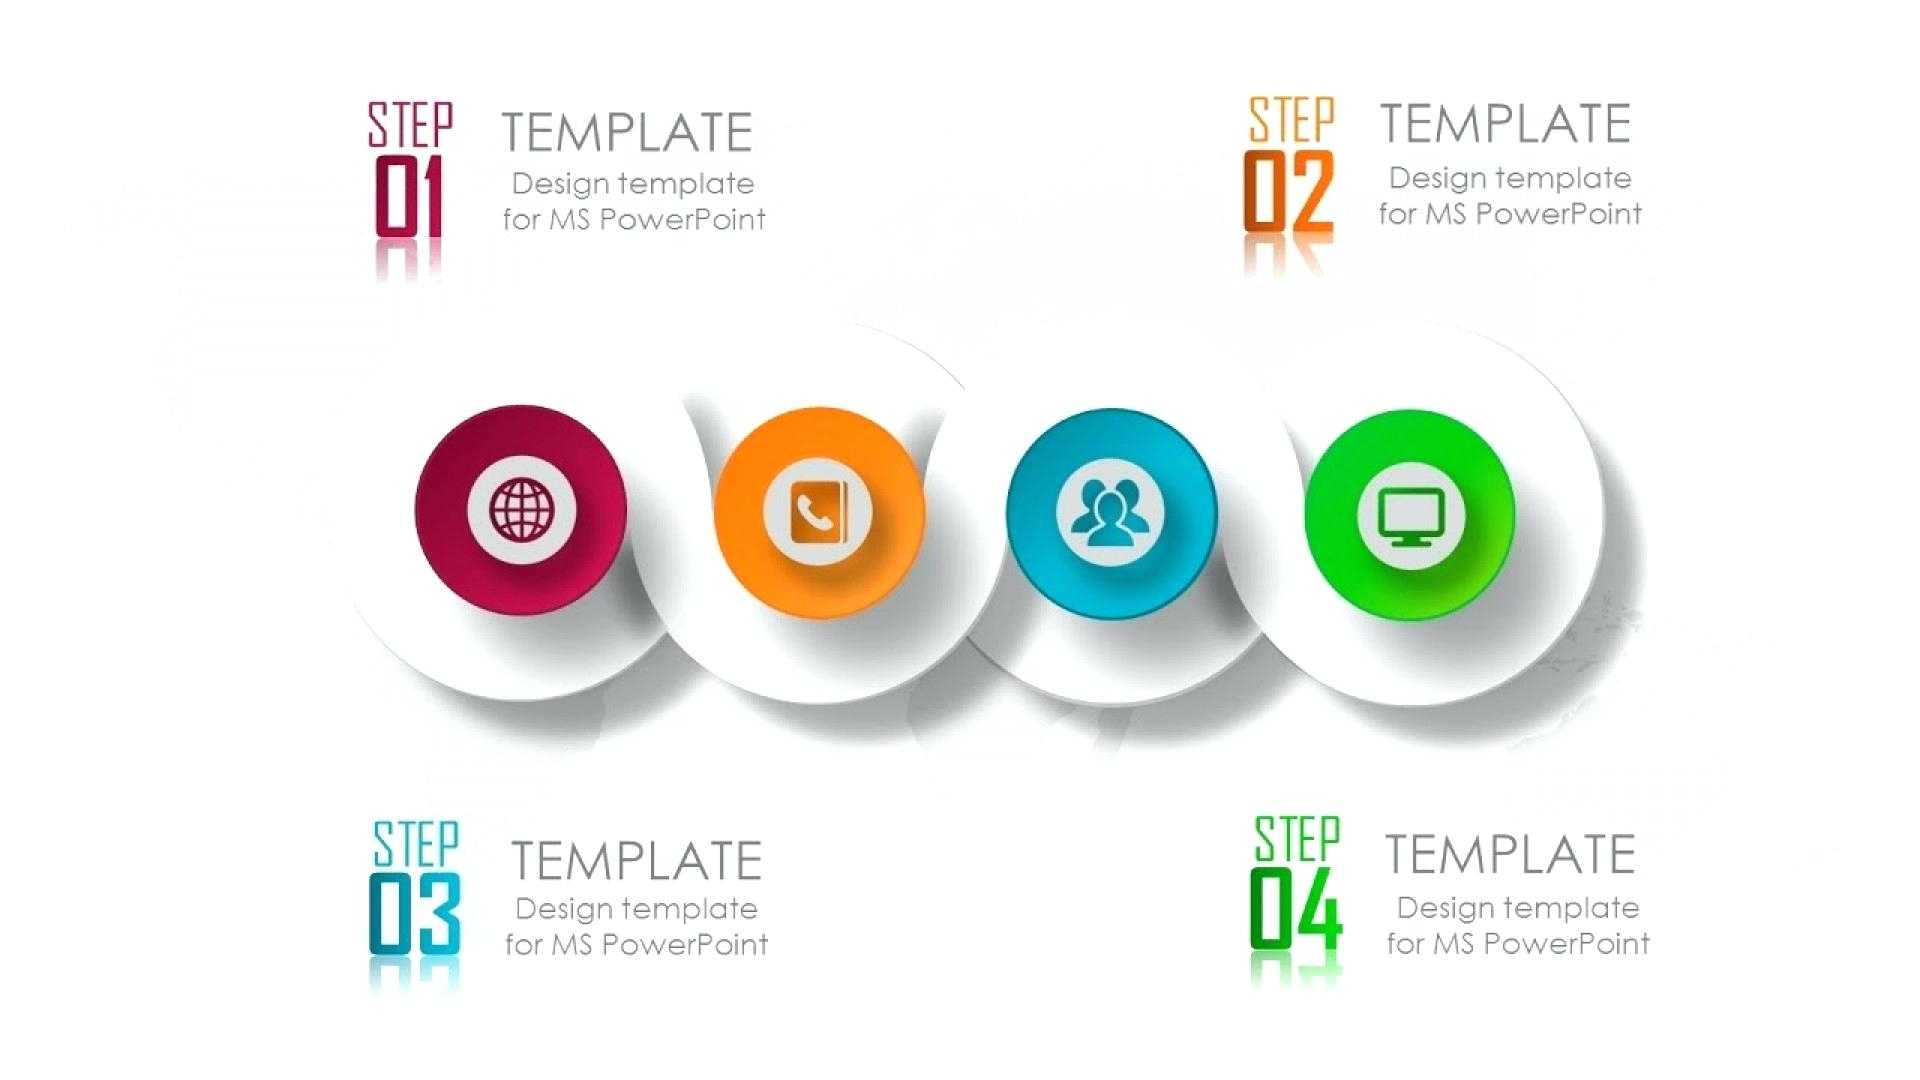 Ppt Free Download Template – Vmarques Throughout Powerpoint Animation Templates Free Download